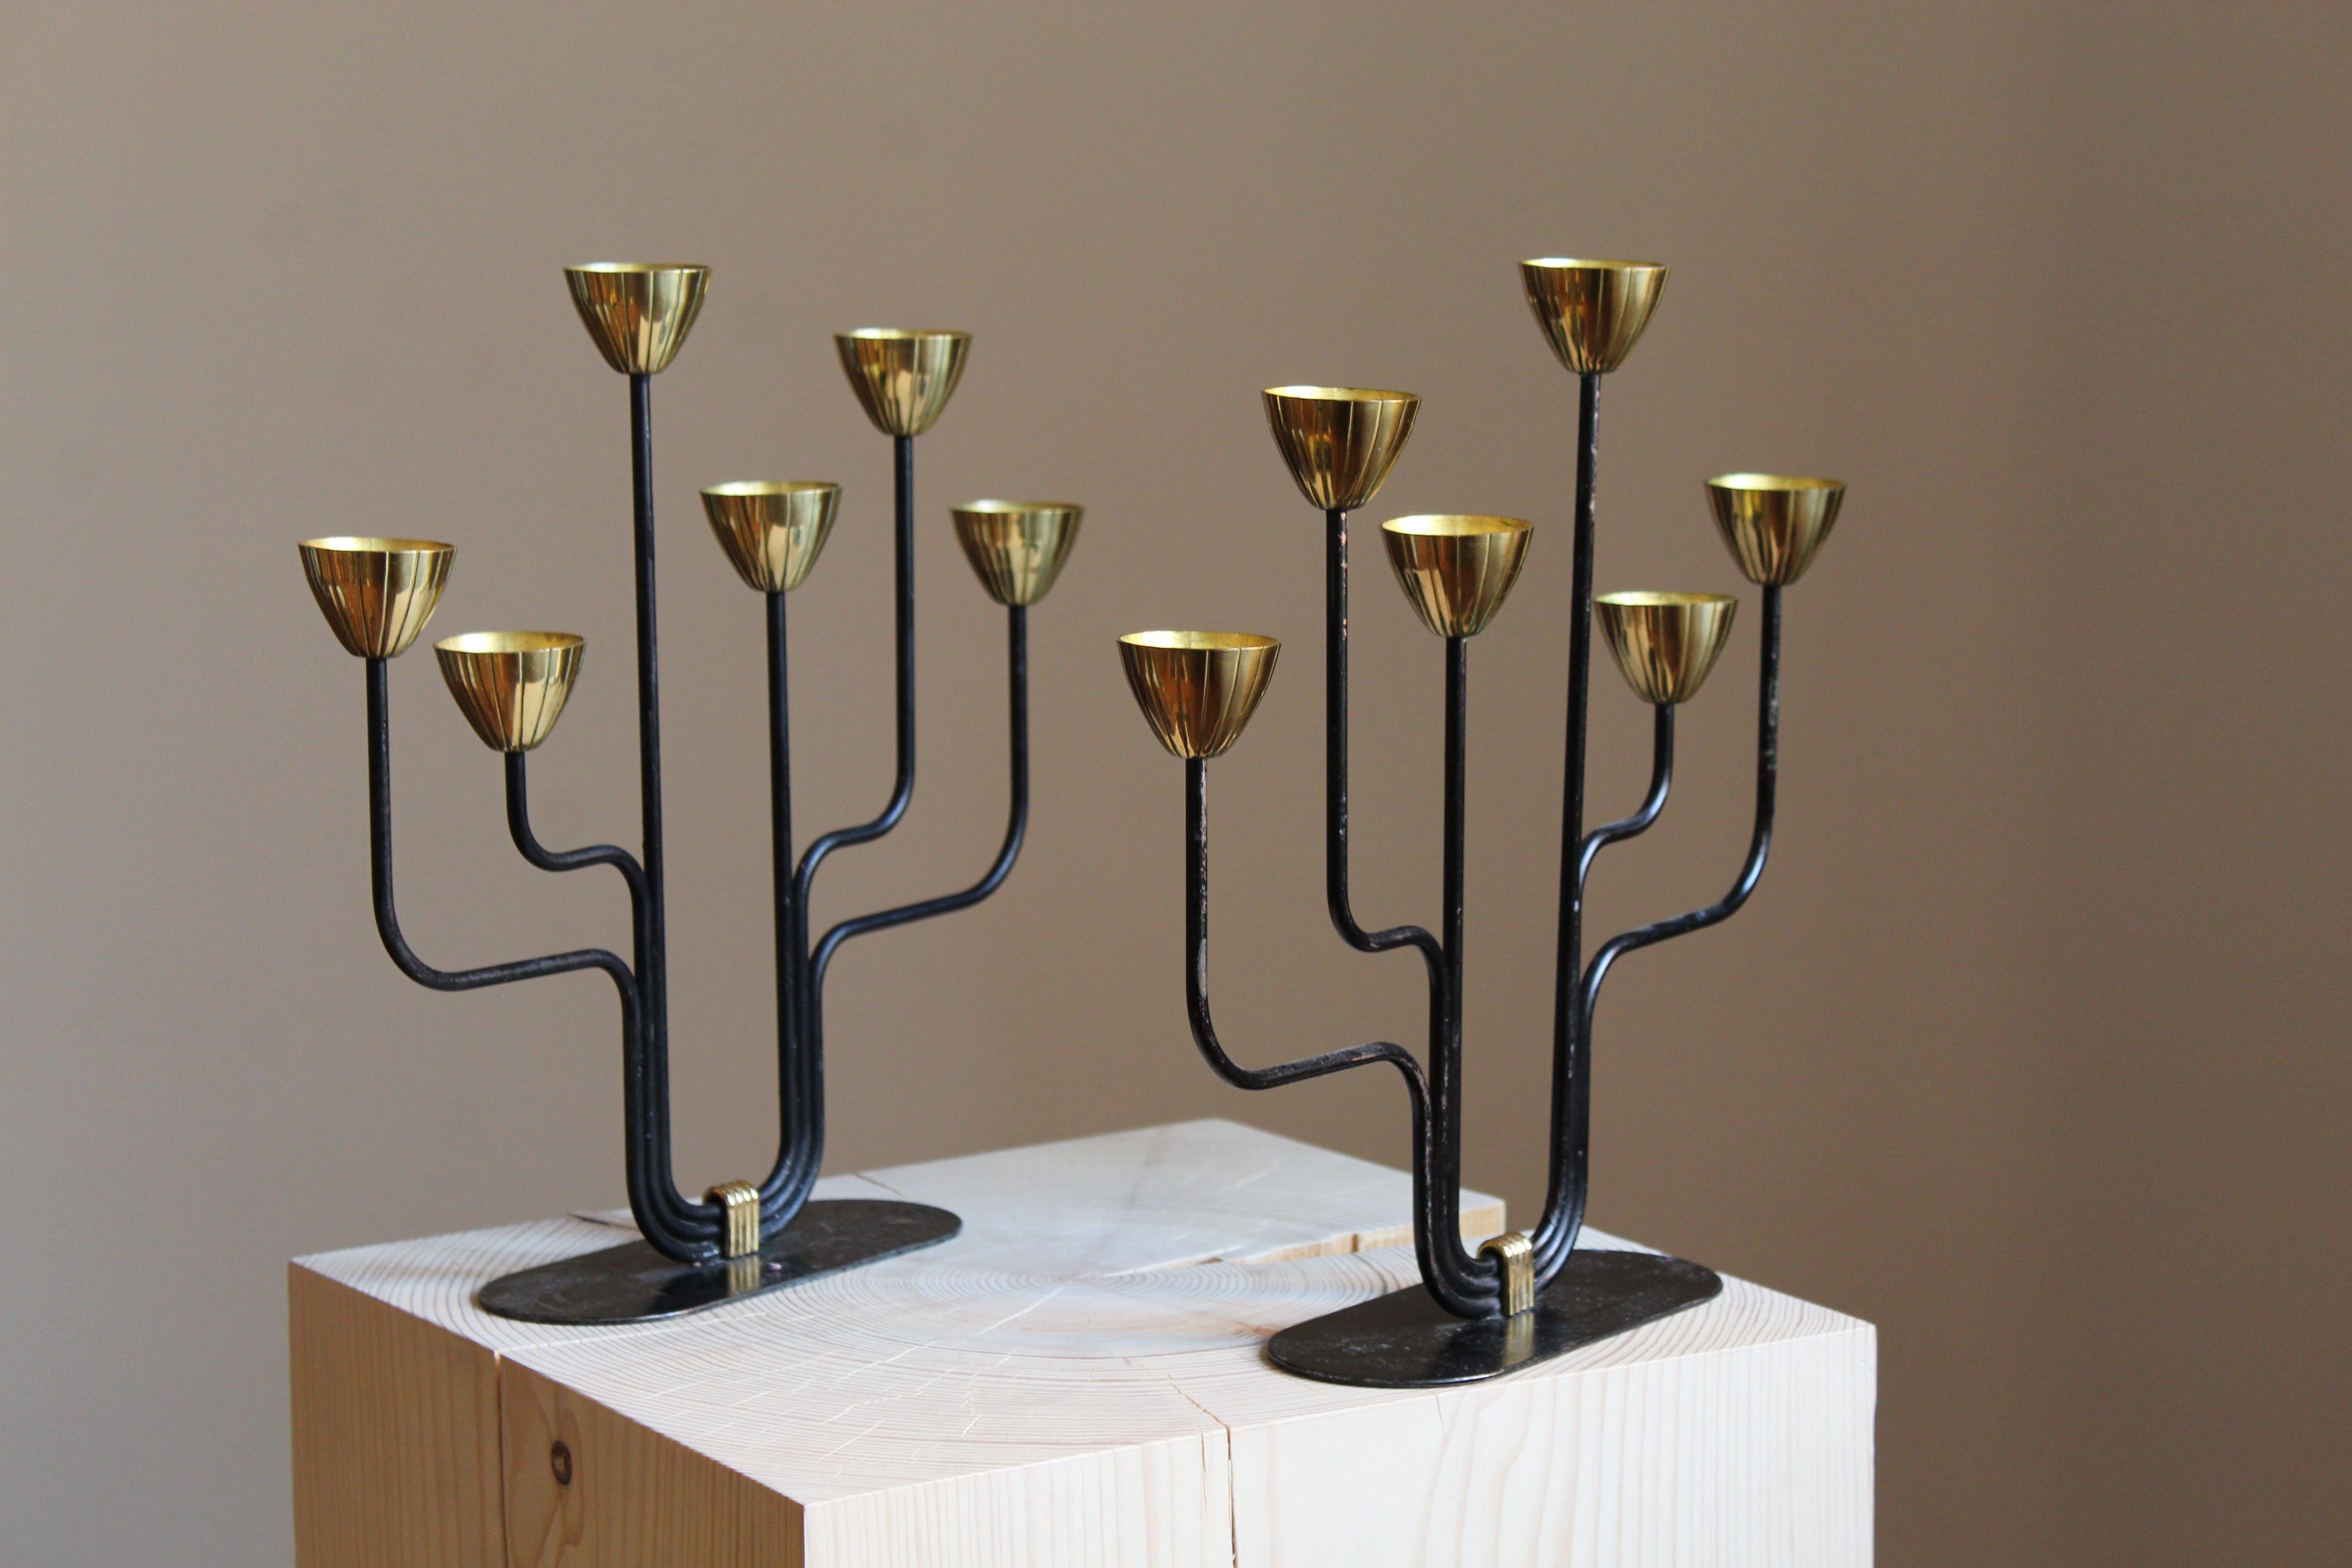 A pair of candelabras, designed by Gunnar Ander for Ystad Metall, Sweden, 1950s. In brass and lacquered steel. Stamped. Smaller model for small candles.

Other designers of the period include Piet Hein, Paavo Tynell, Josef Frank, and Jean